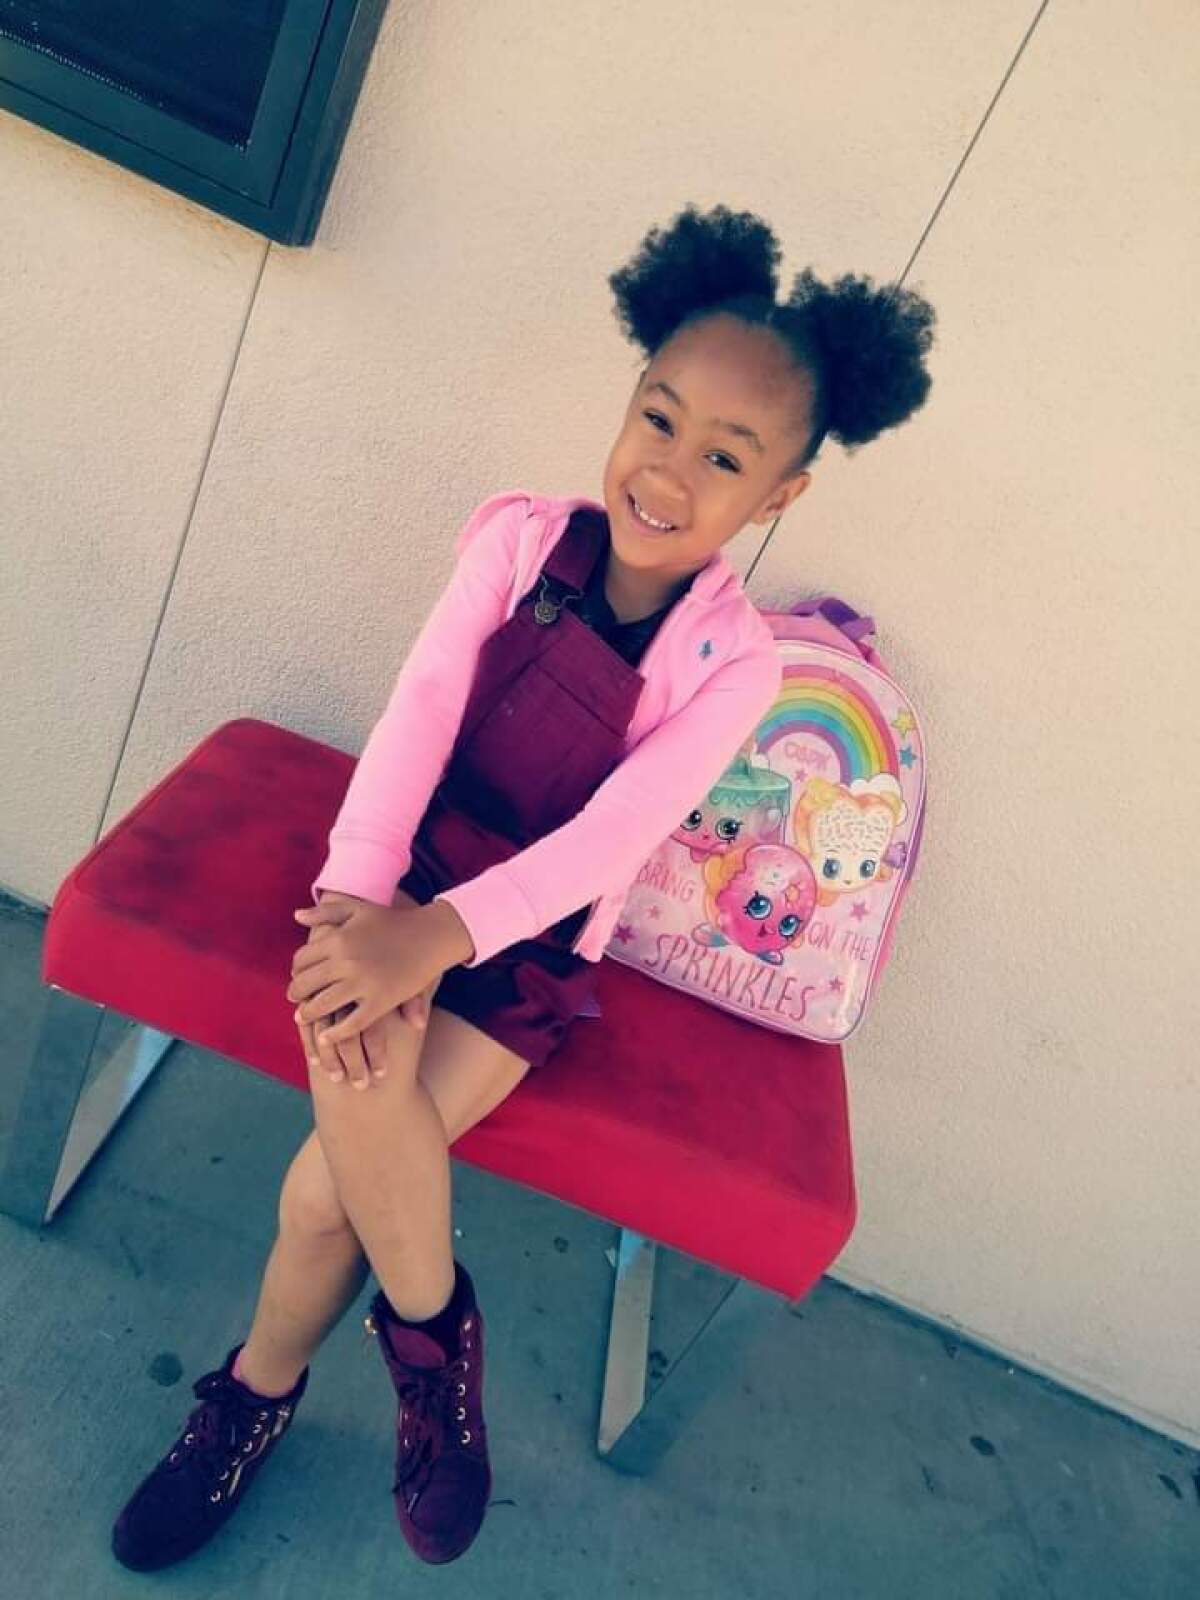 Makaylah Brent, 9, died in a drive-by shooting Saturday in Sacramento's Del Paso Heights neighborhood. 